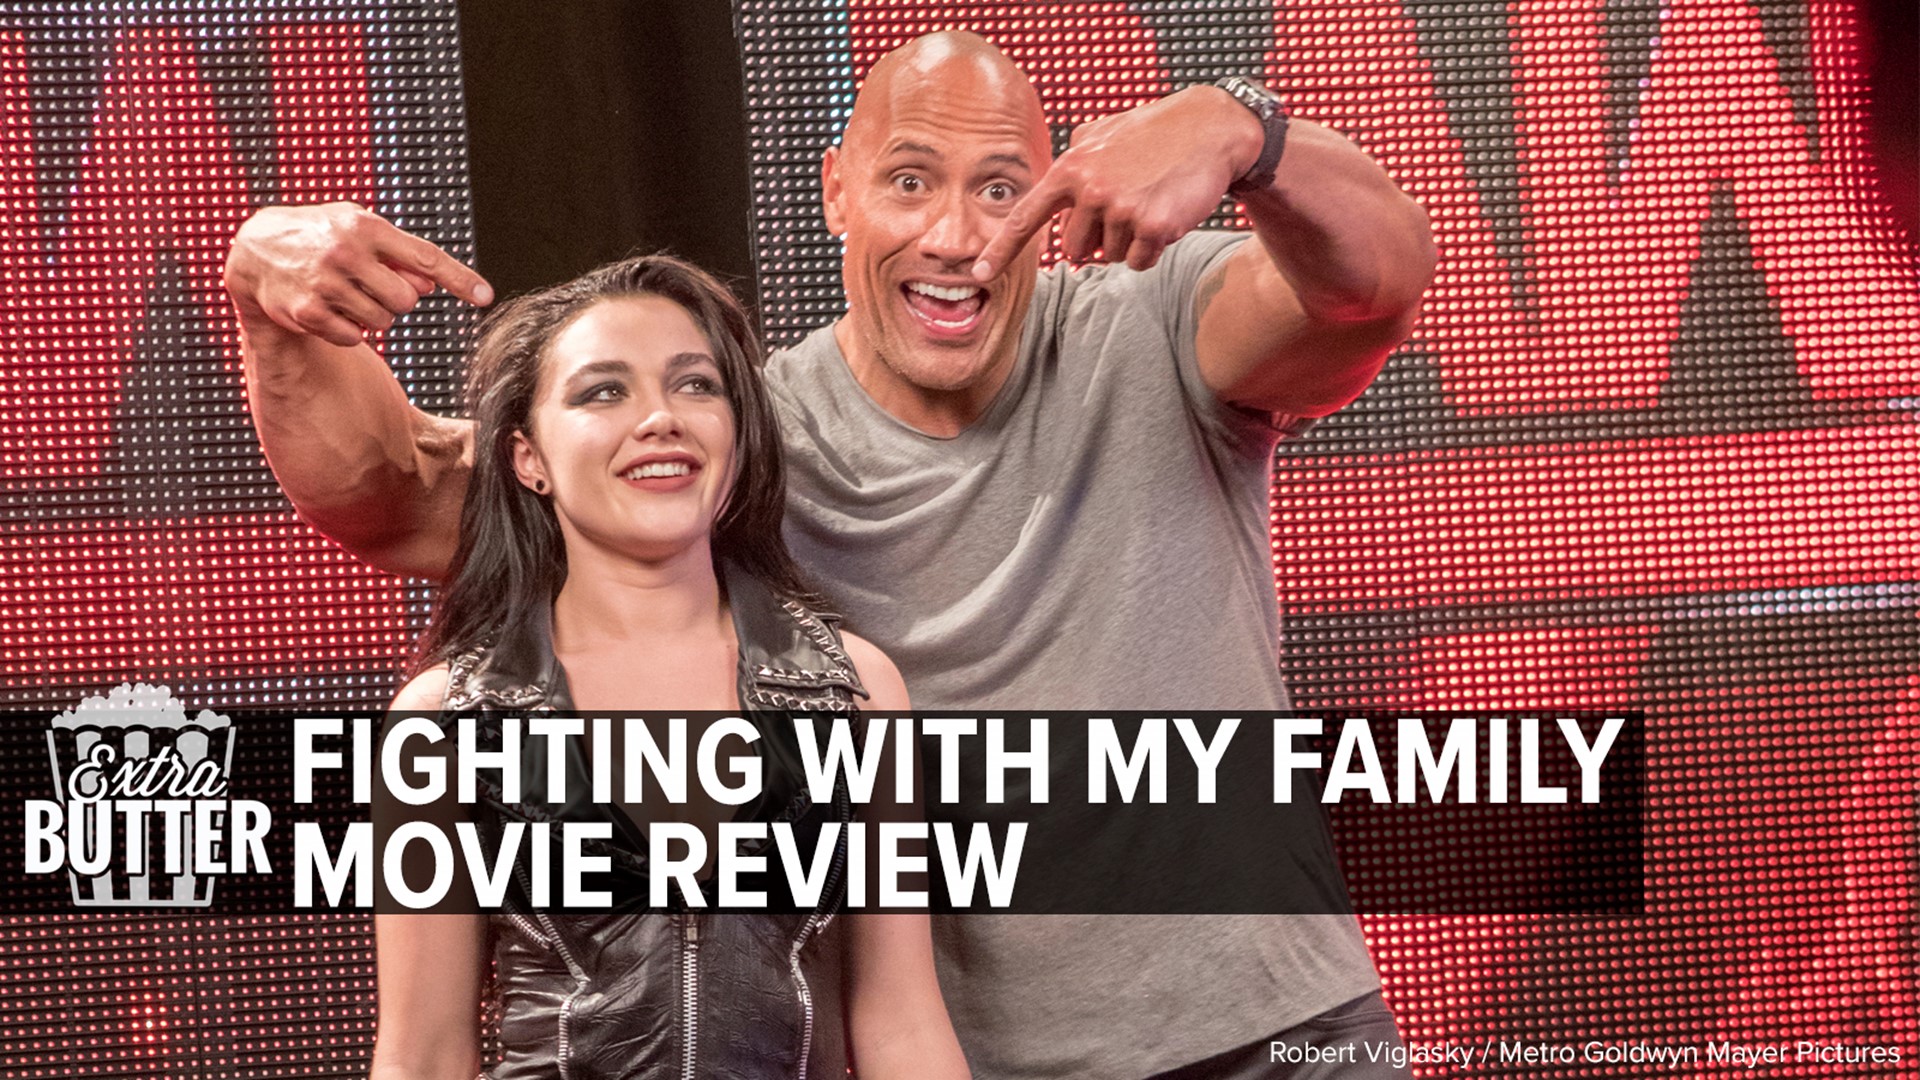 Go see this movie! That's the recommendation from Mark S. Allen who loved this movie. Mark talks with the former WWE Diva Paige along with the director Stephen Merchant. The movie also stars Dwayne "The Rock" Johnson and Vince Vaughn. Interview arranged by United Artists Releasing.